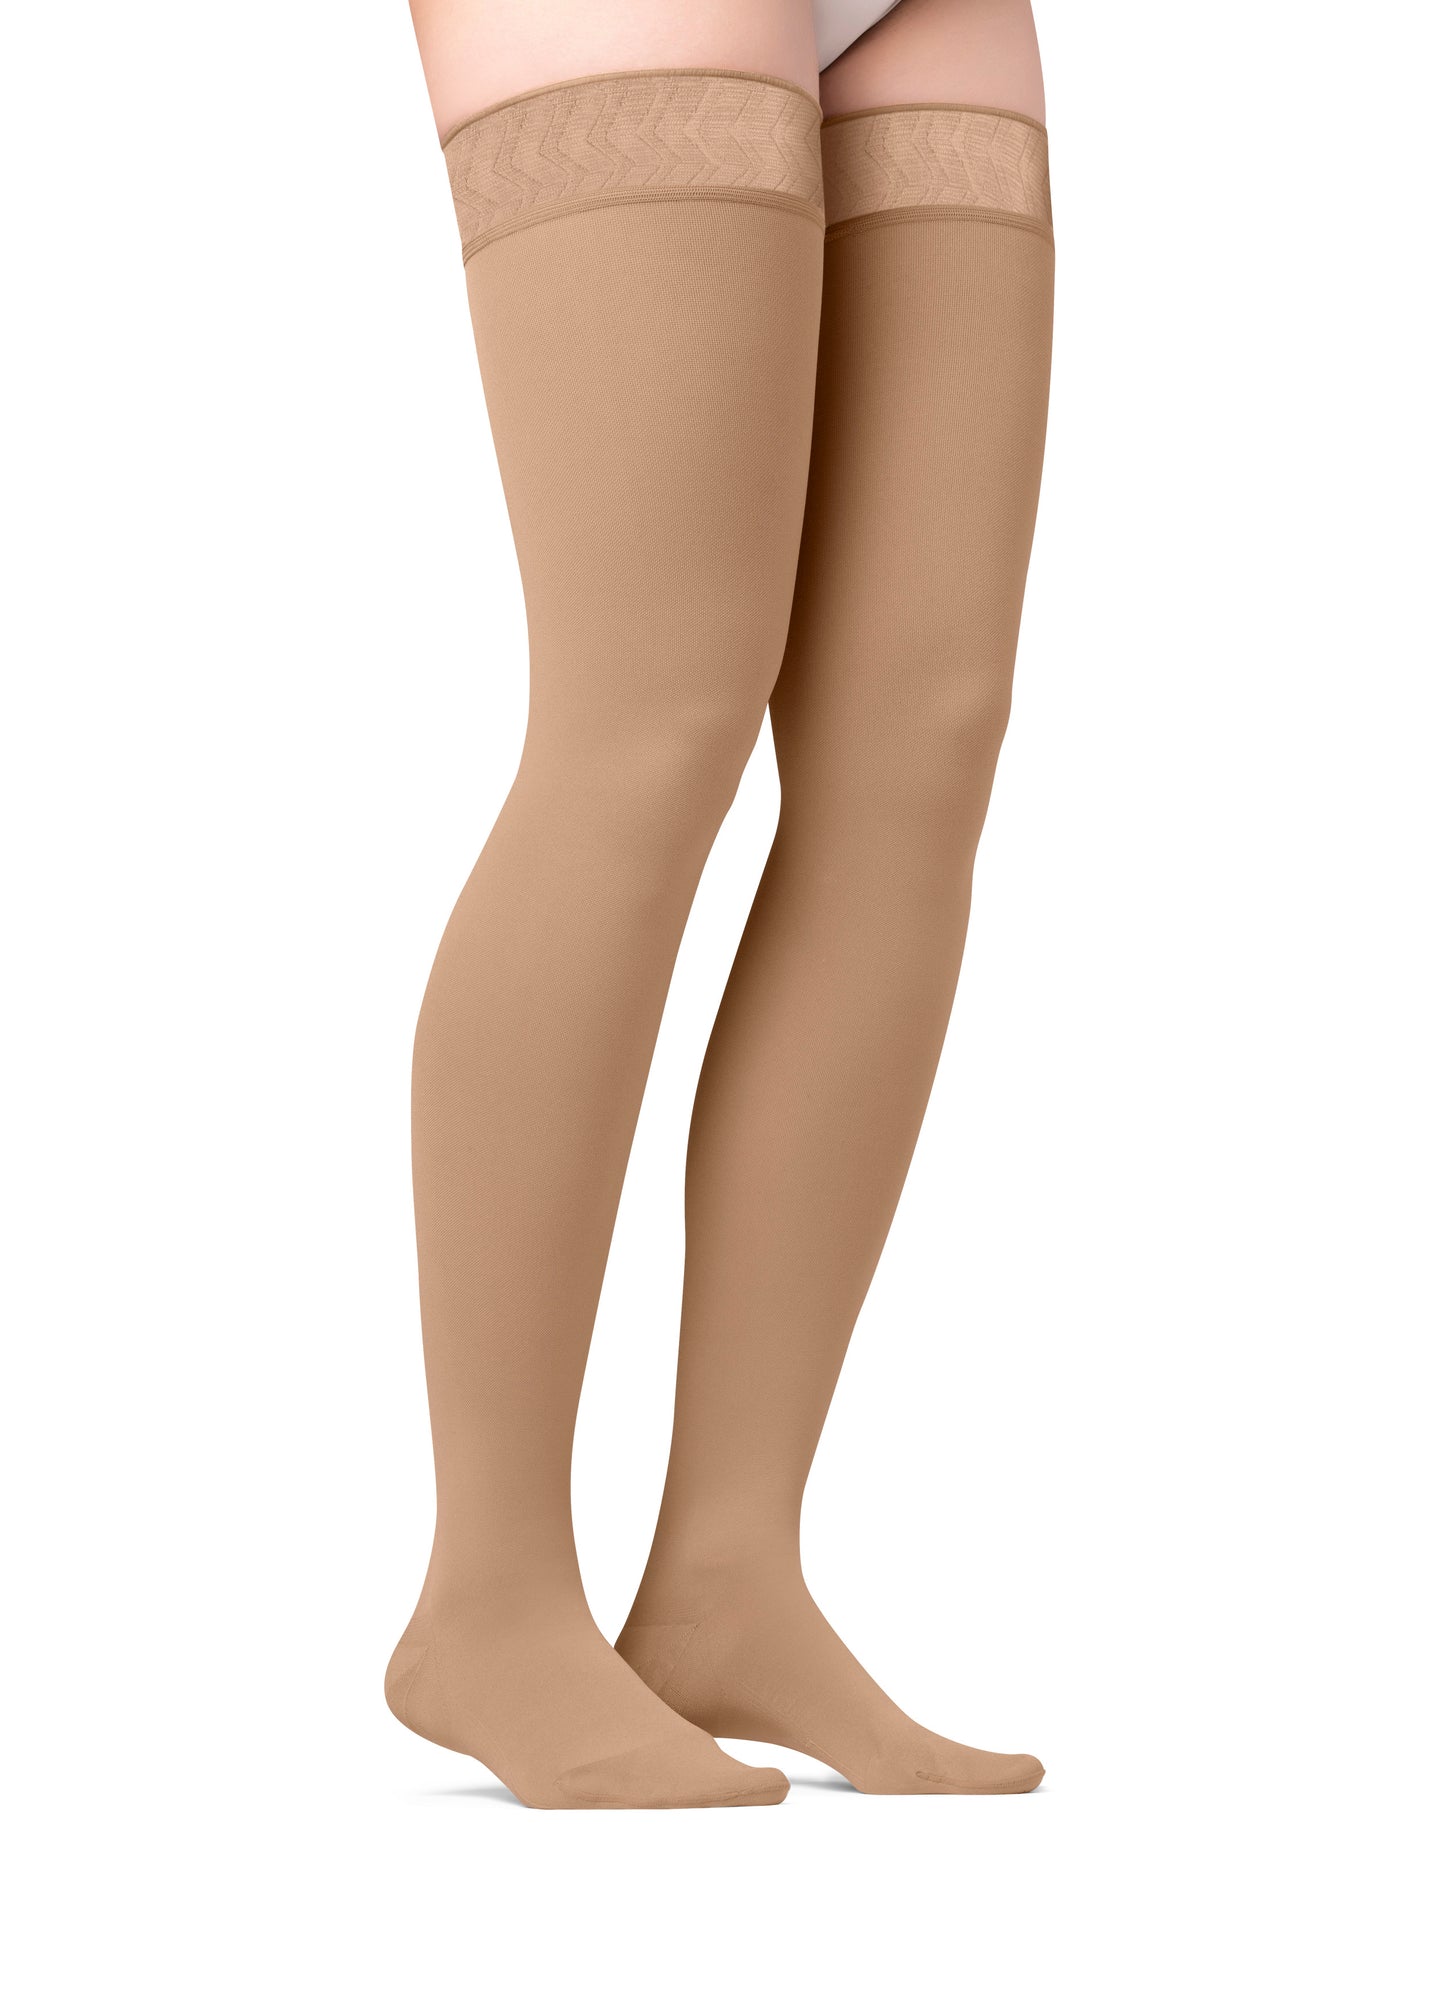 JOBST Maternity Opaque Compression Stockings 20-30 mmHg Thigh High Closed Toe